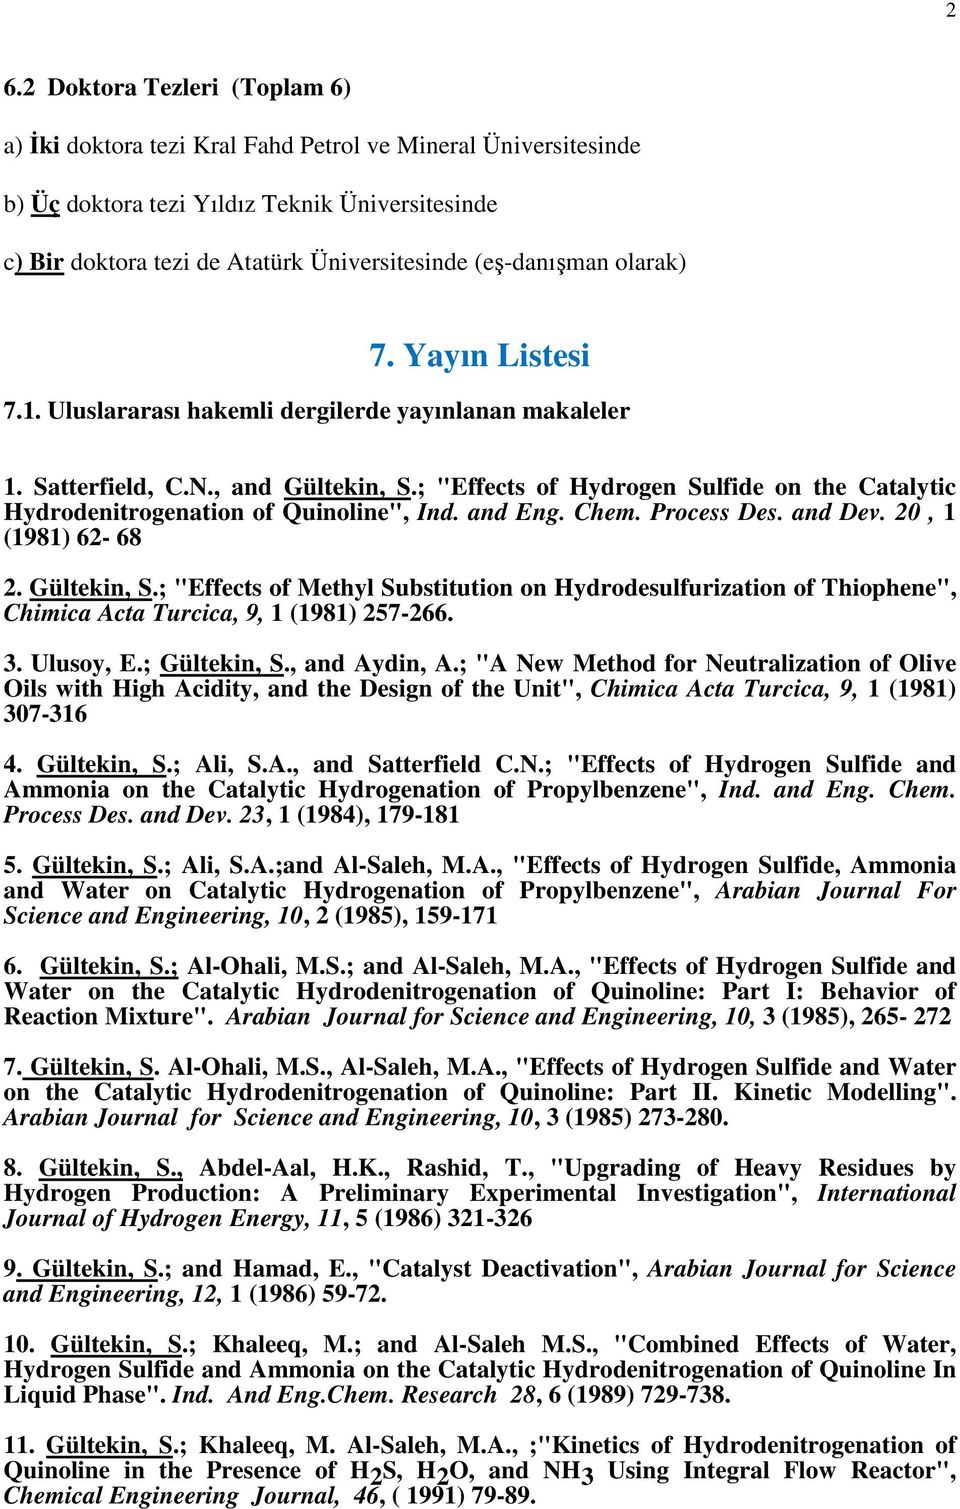 ; "Effects of Hydrogen Sulfide on the Catalytic Hydrodenitrogenation of Quinoline", Ind. and Eng. Chem. Process Des. and Dev., 1 (1981) 6-68. Gültekin, S.